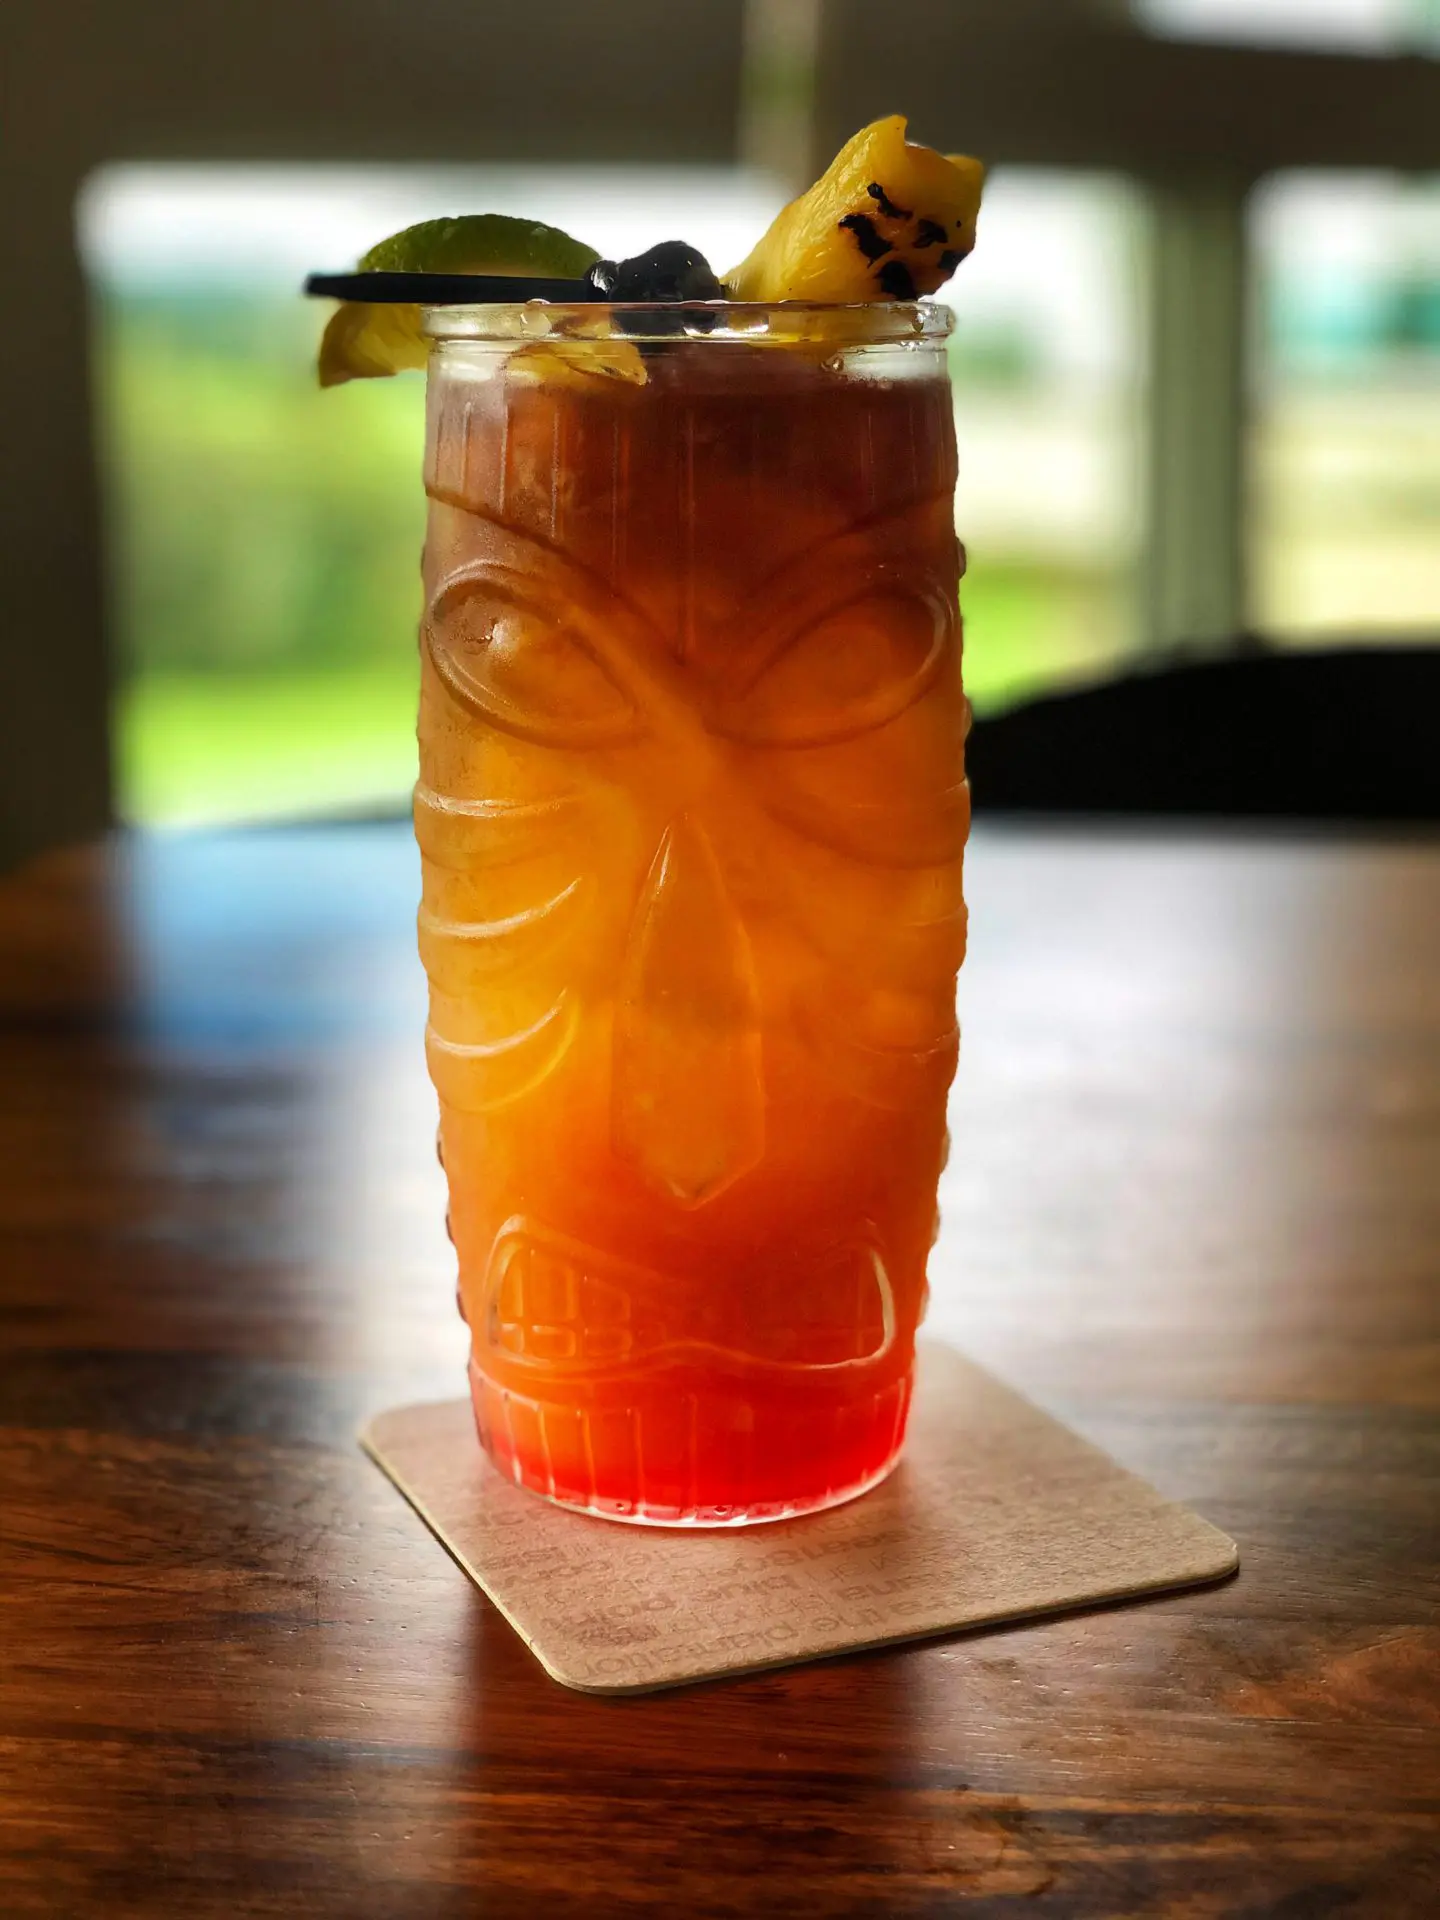 A Mai Tai at Maui’s Plantation House Restaurant: A Hawaiian restaurant located on the Plantation Golf Course provides scenic views from the 19th hole and serves sophisticated island dishes. 